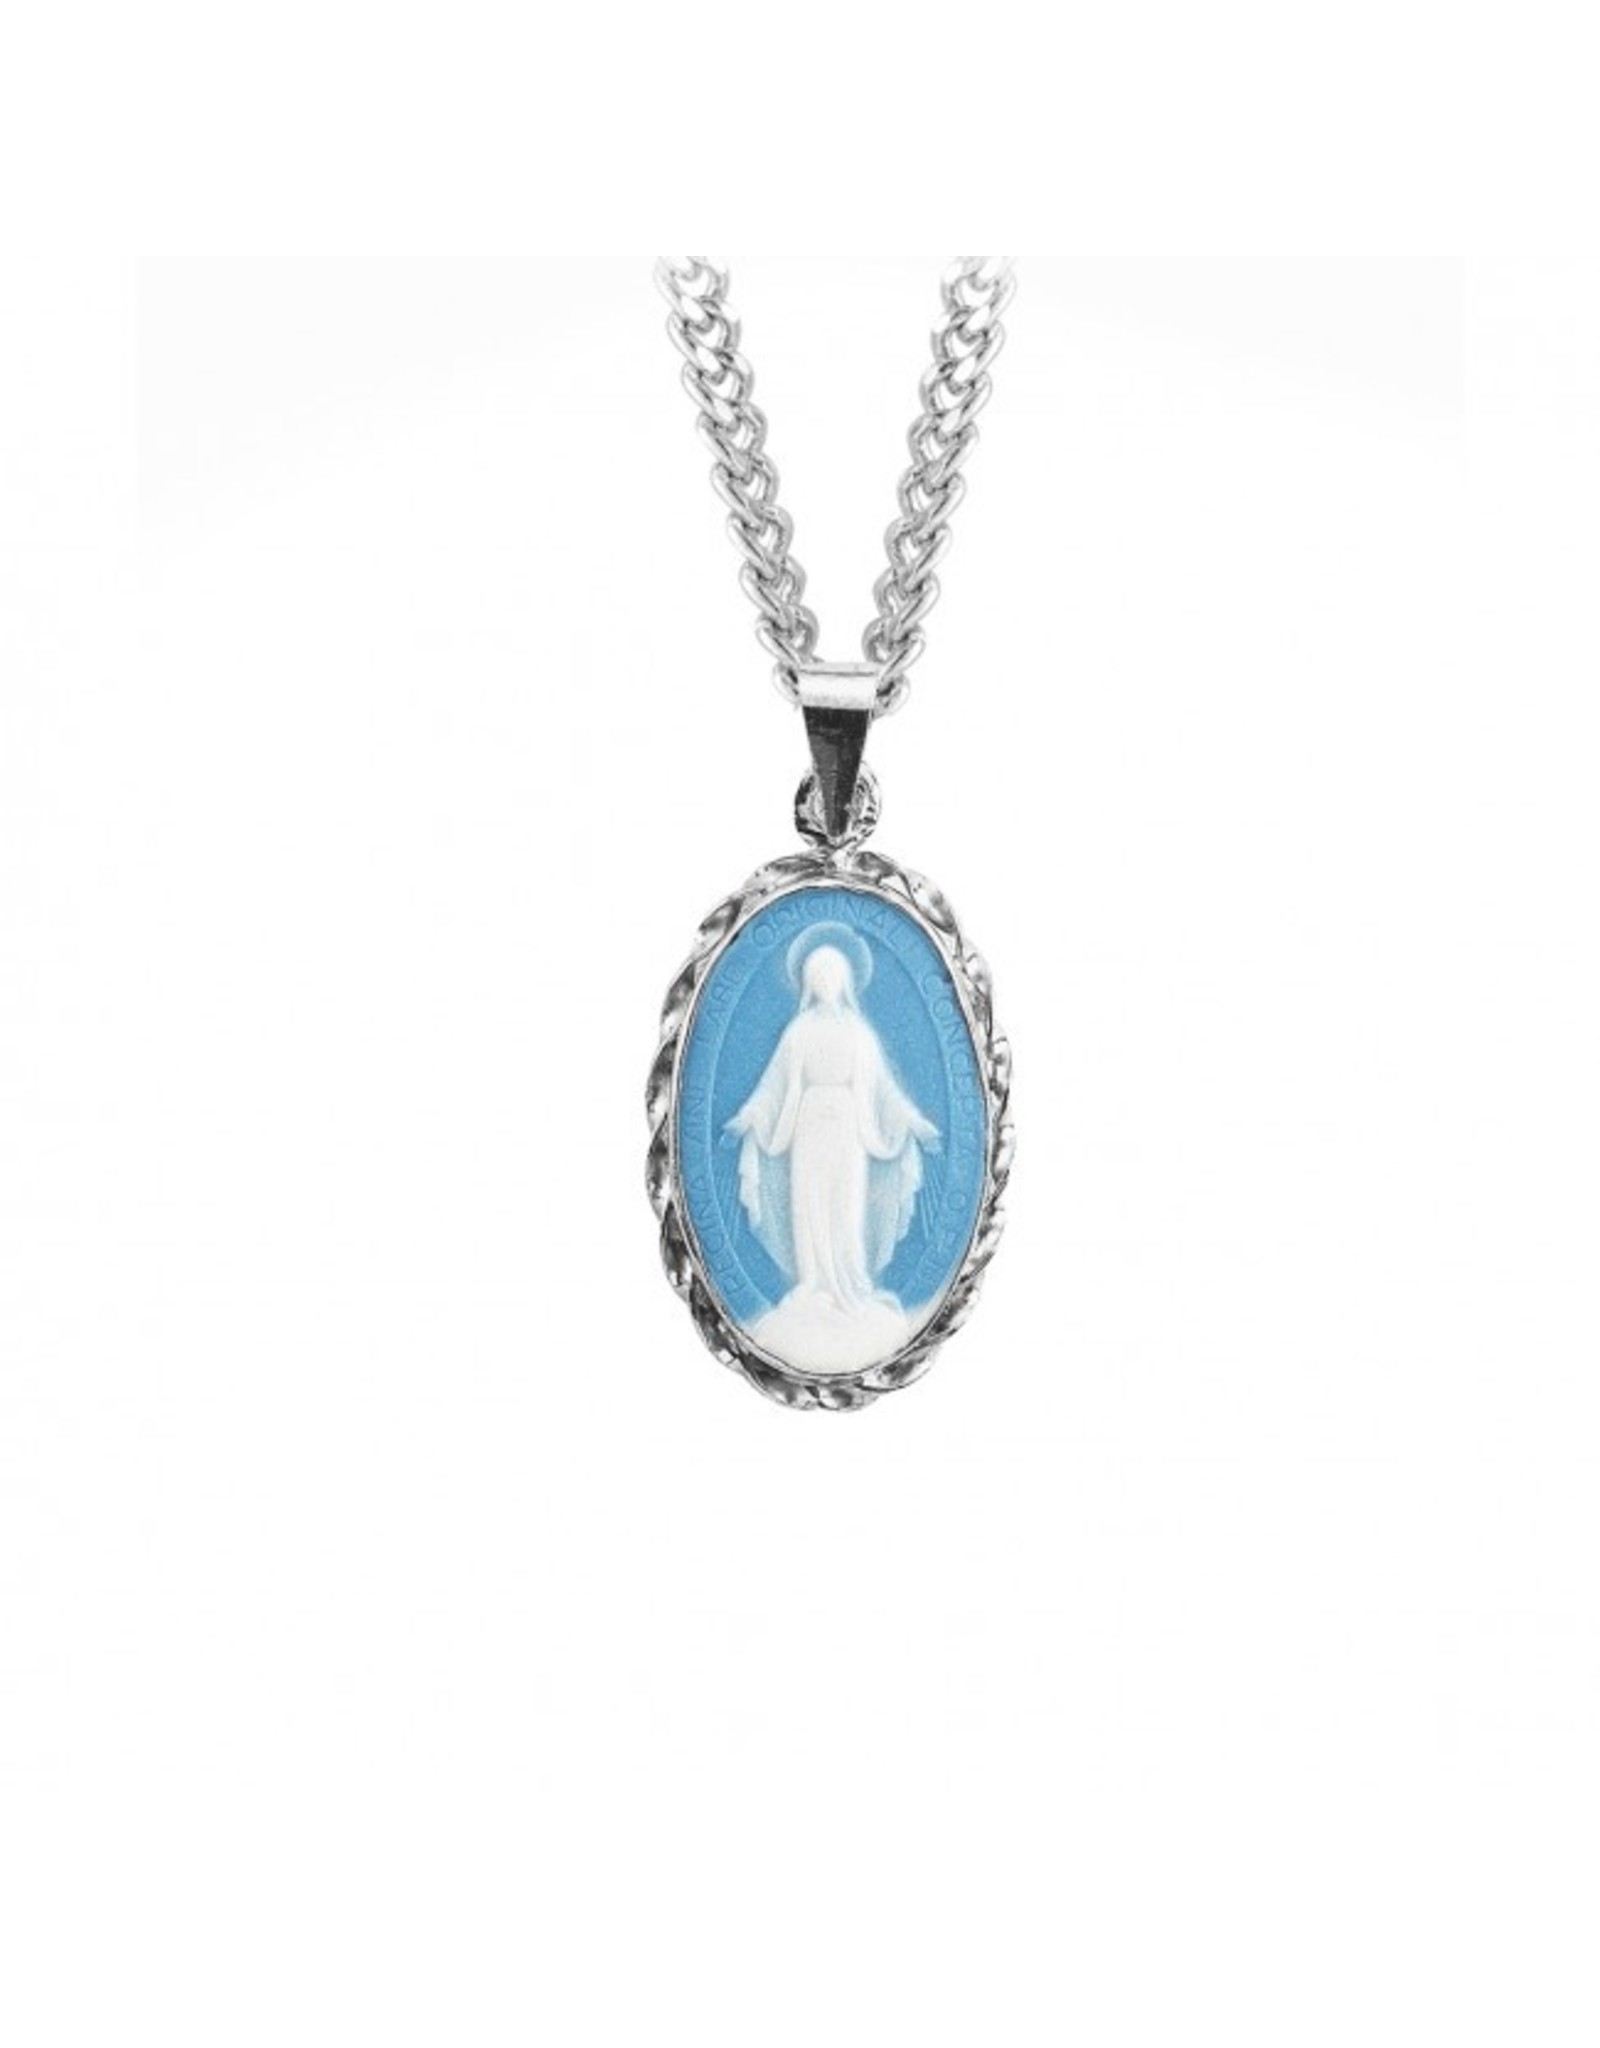 HMH Blue Miraculous Cameo Medal, Sterling Silver, 18" Chain